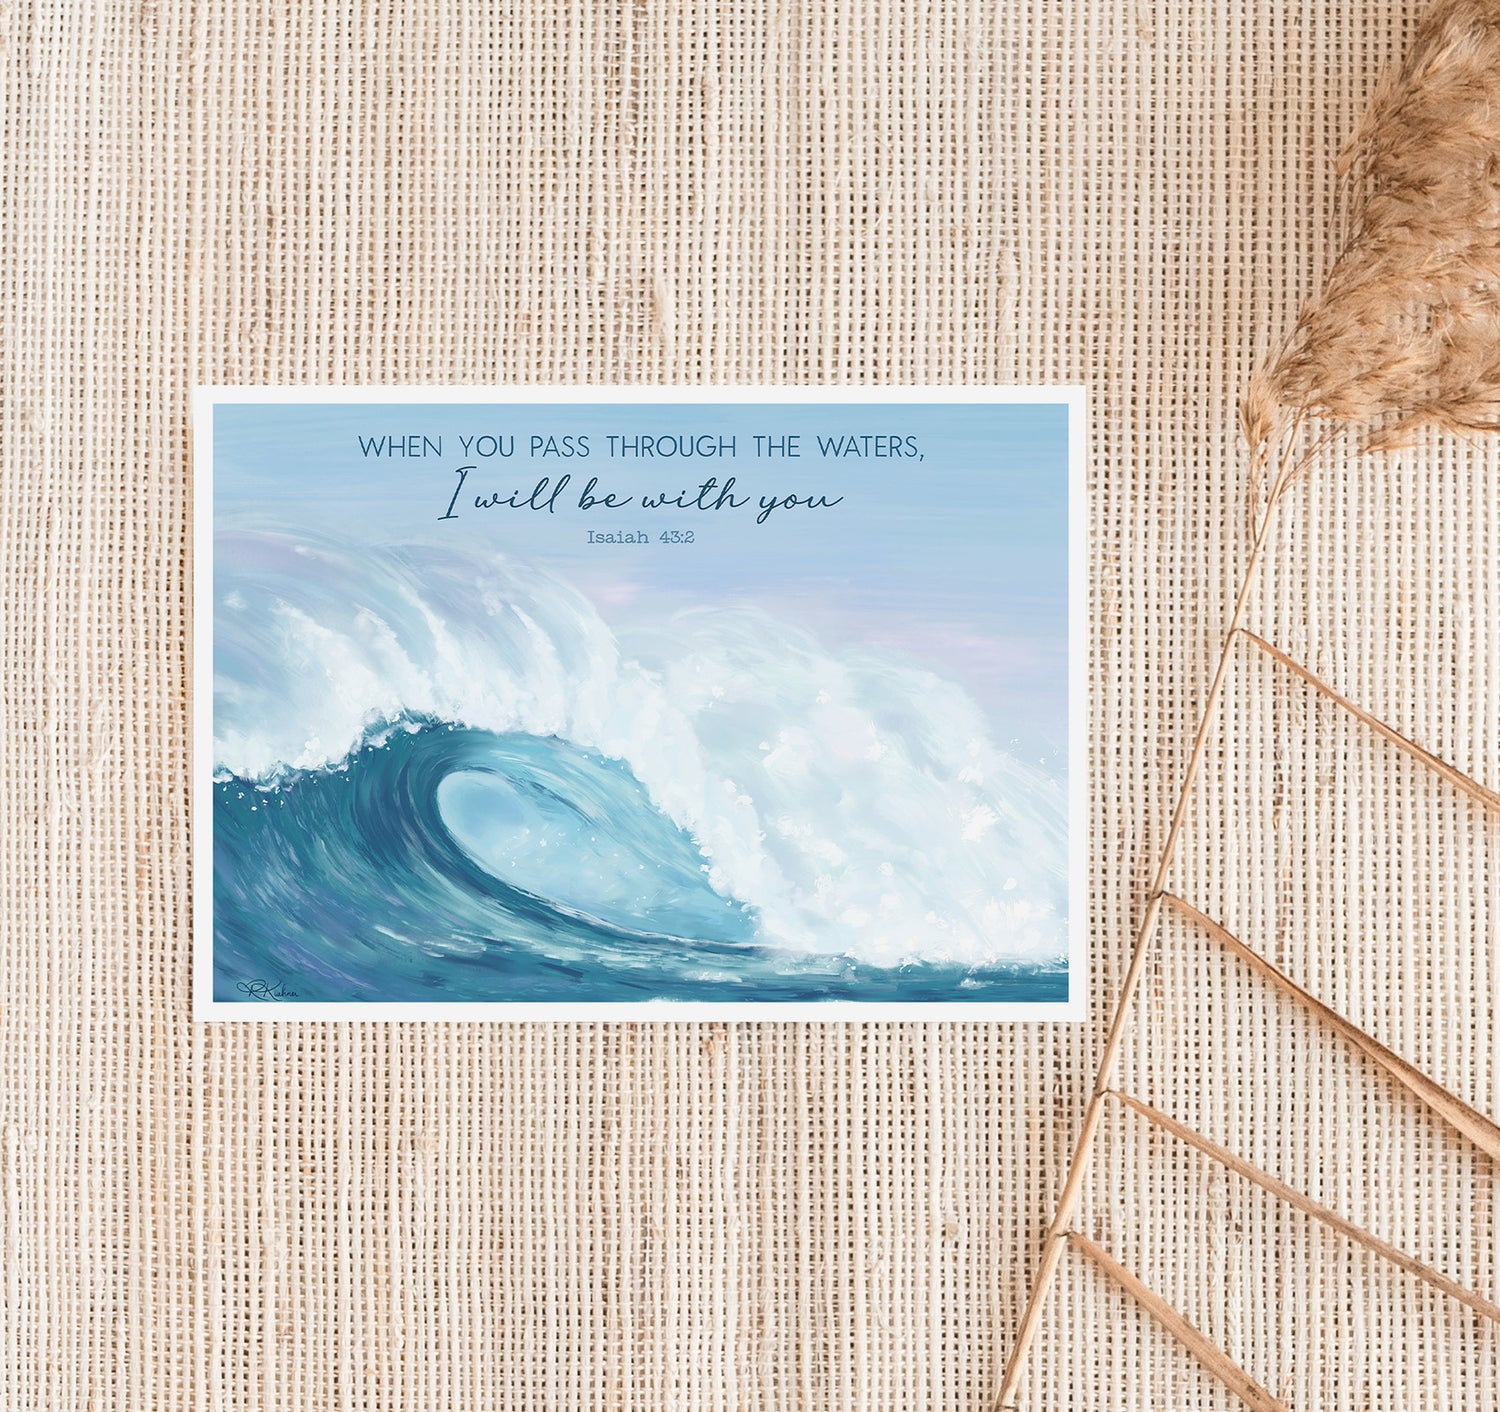 Christian art print of an ocean wave with the Isaiah 43:2 Bible verse &quot;when you pass through the waters, I will be with you.&quot;